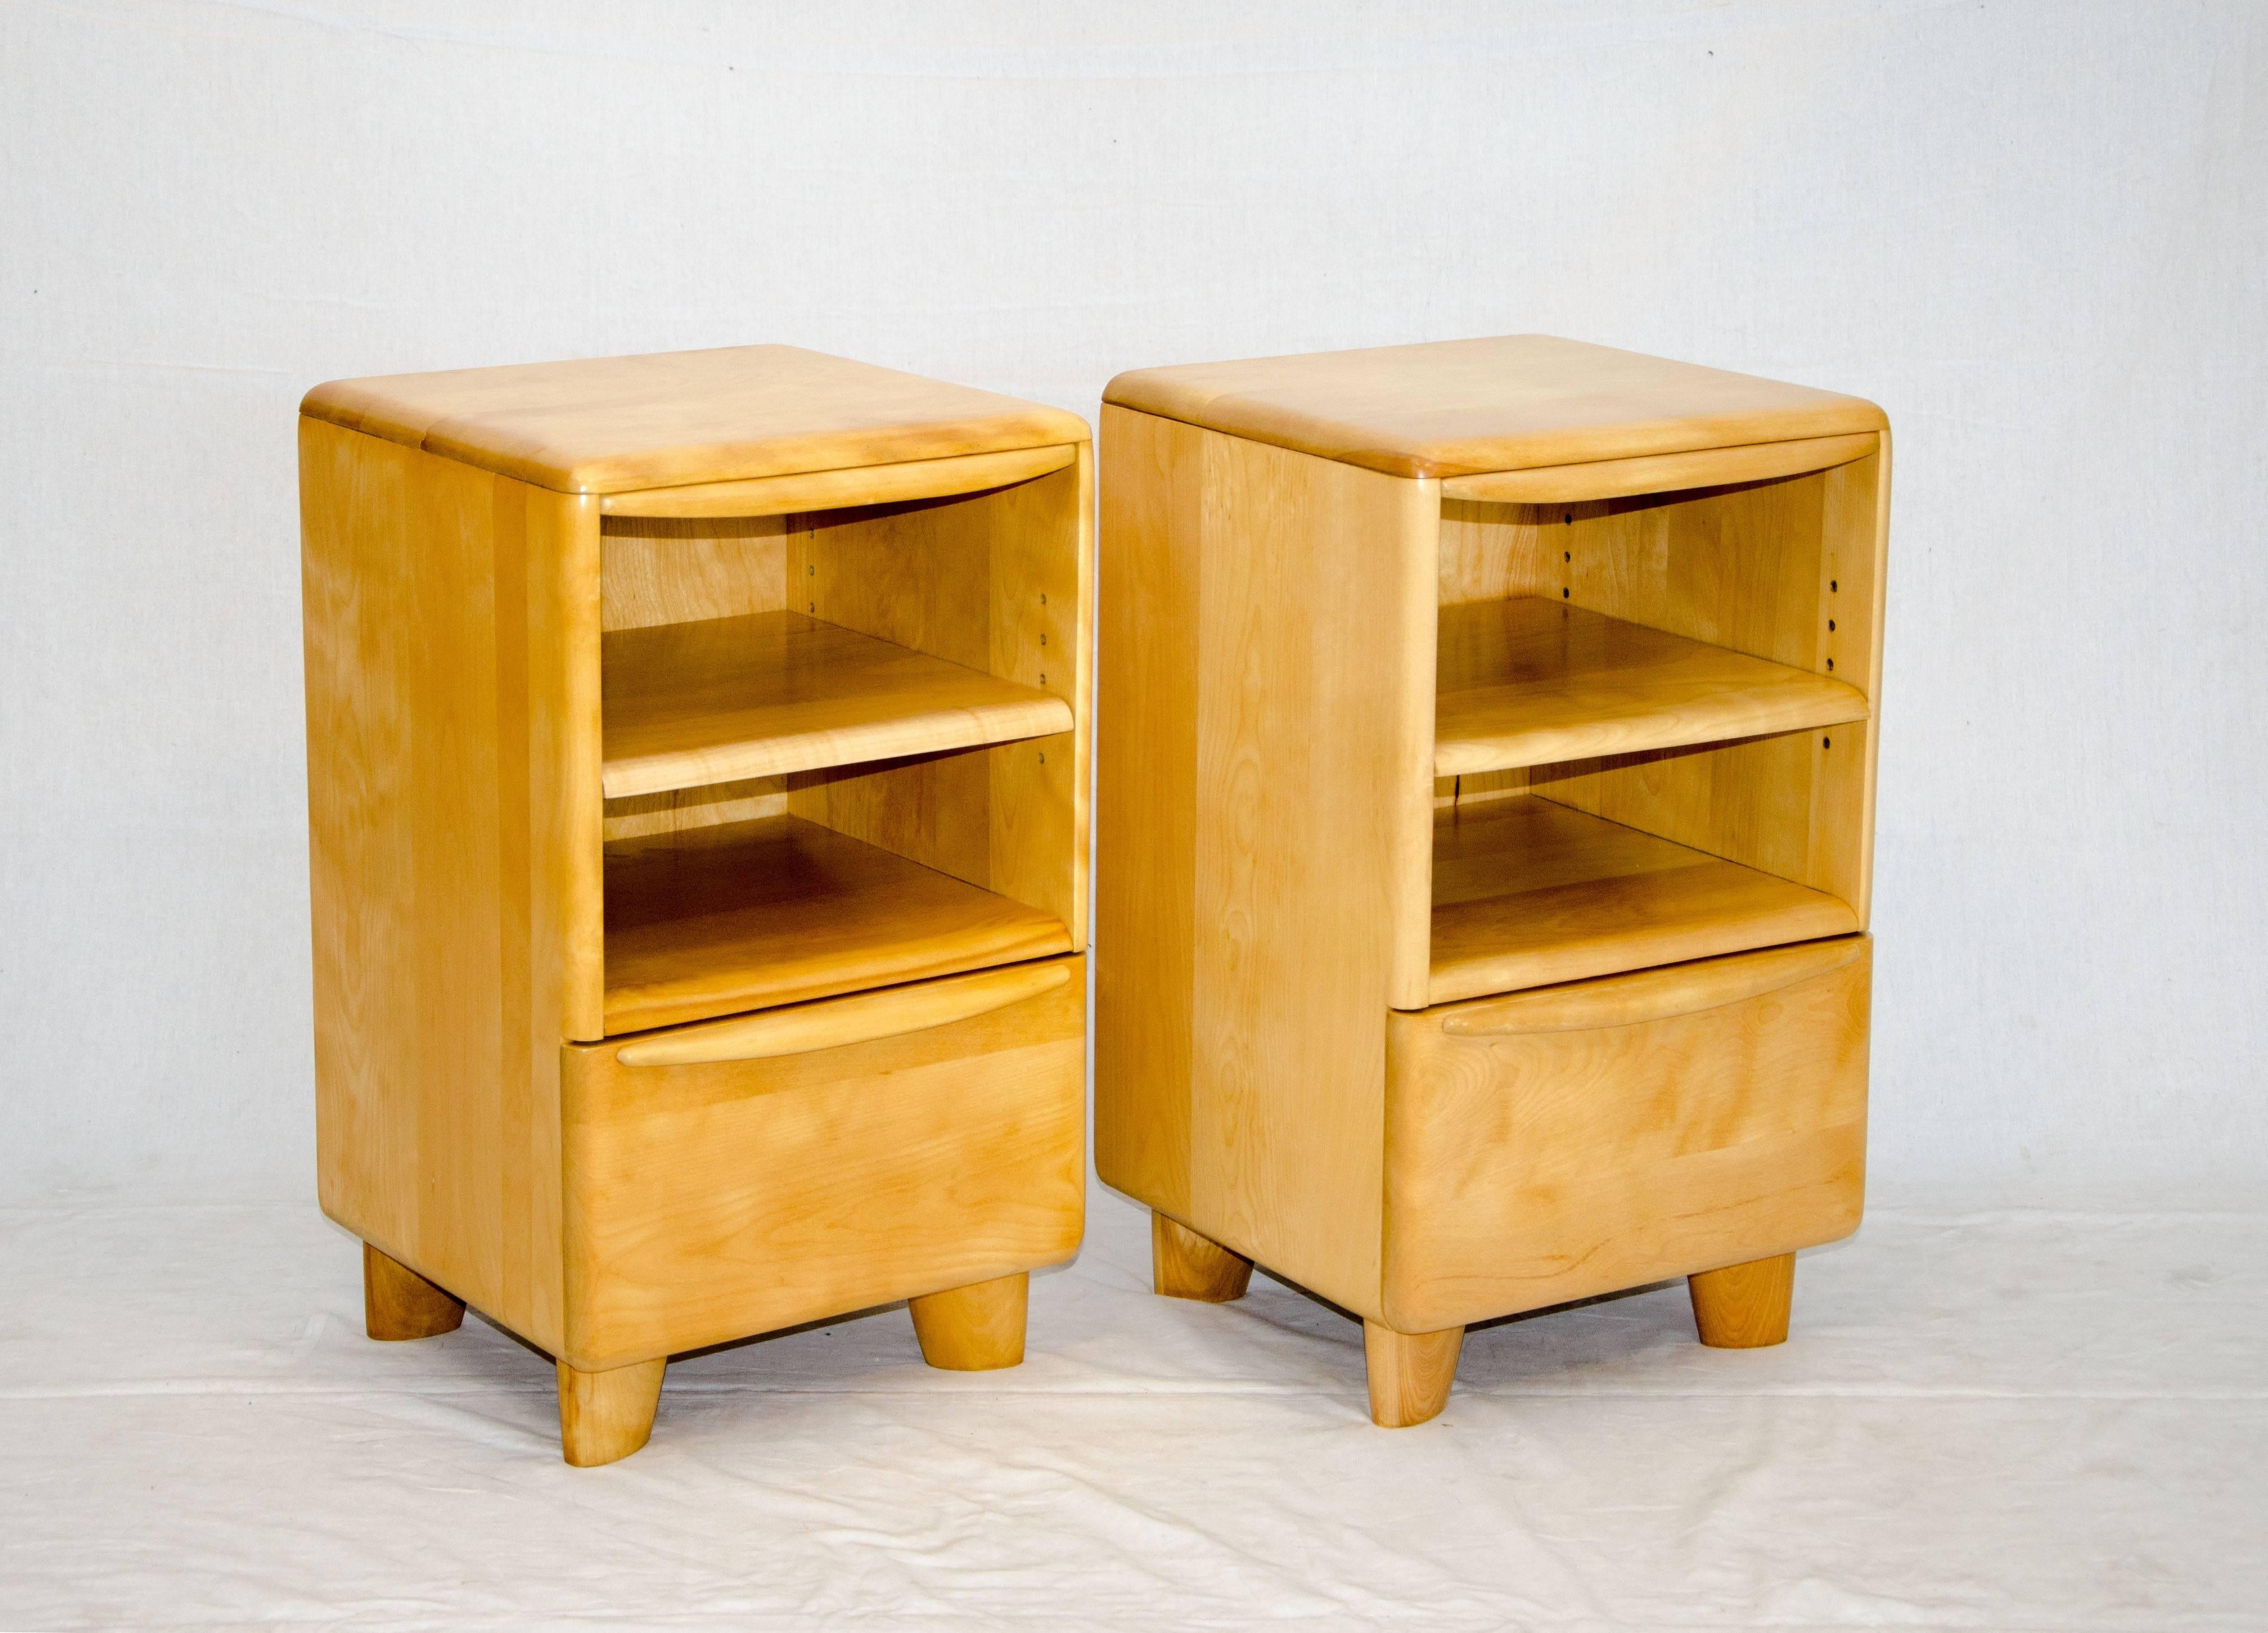 Pair of Heywood Wakefield nightstands from the "Encore" series (M 518) manufactured from 1948-1955.The open space has an adjustable or removable shelf, the space measures 13 1/4" wide by 13" deep and 12" tall. The drawer